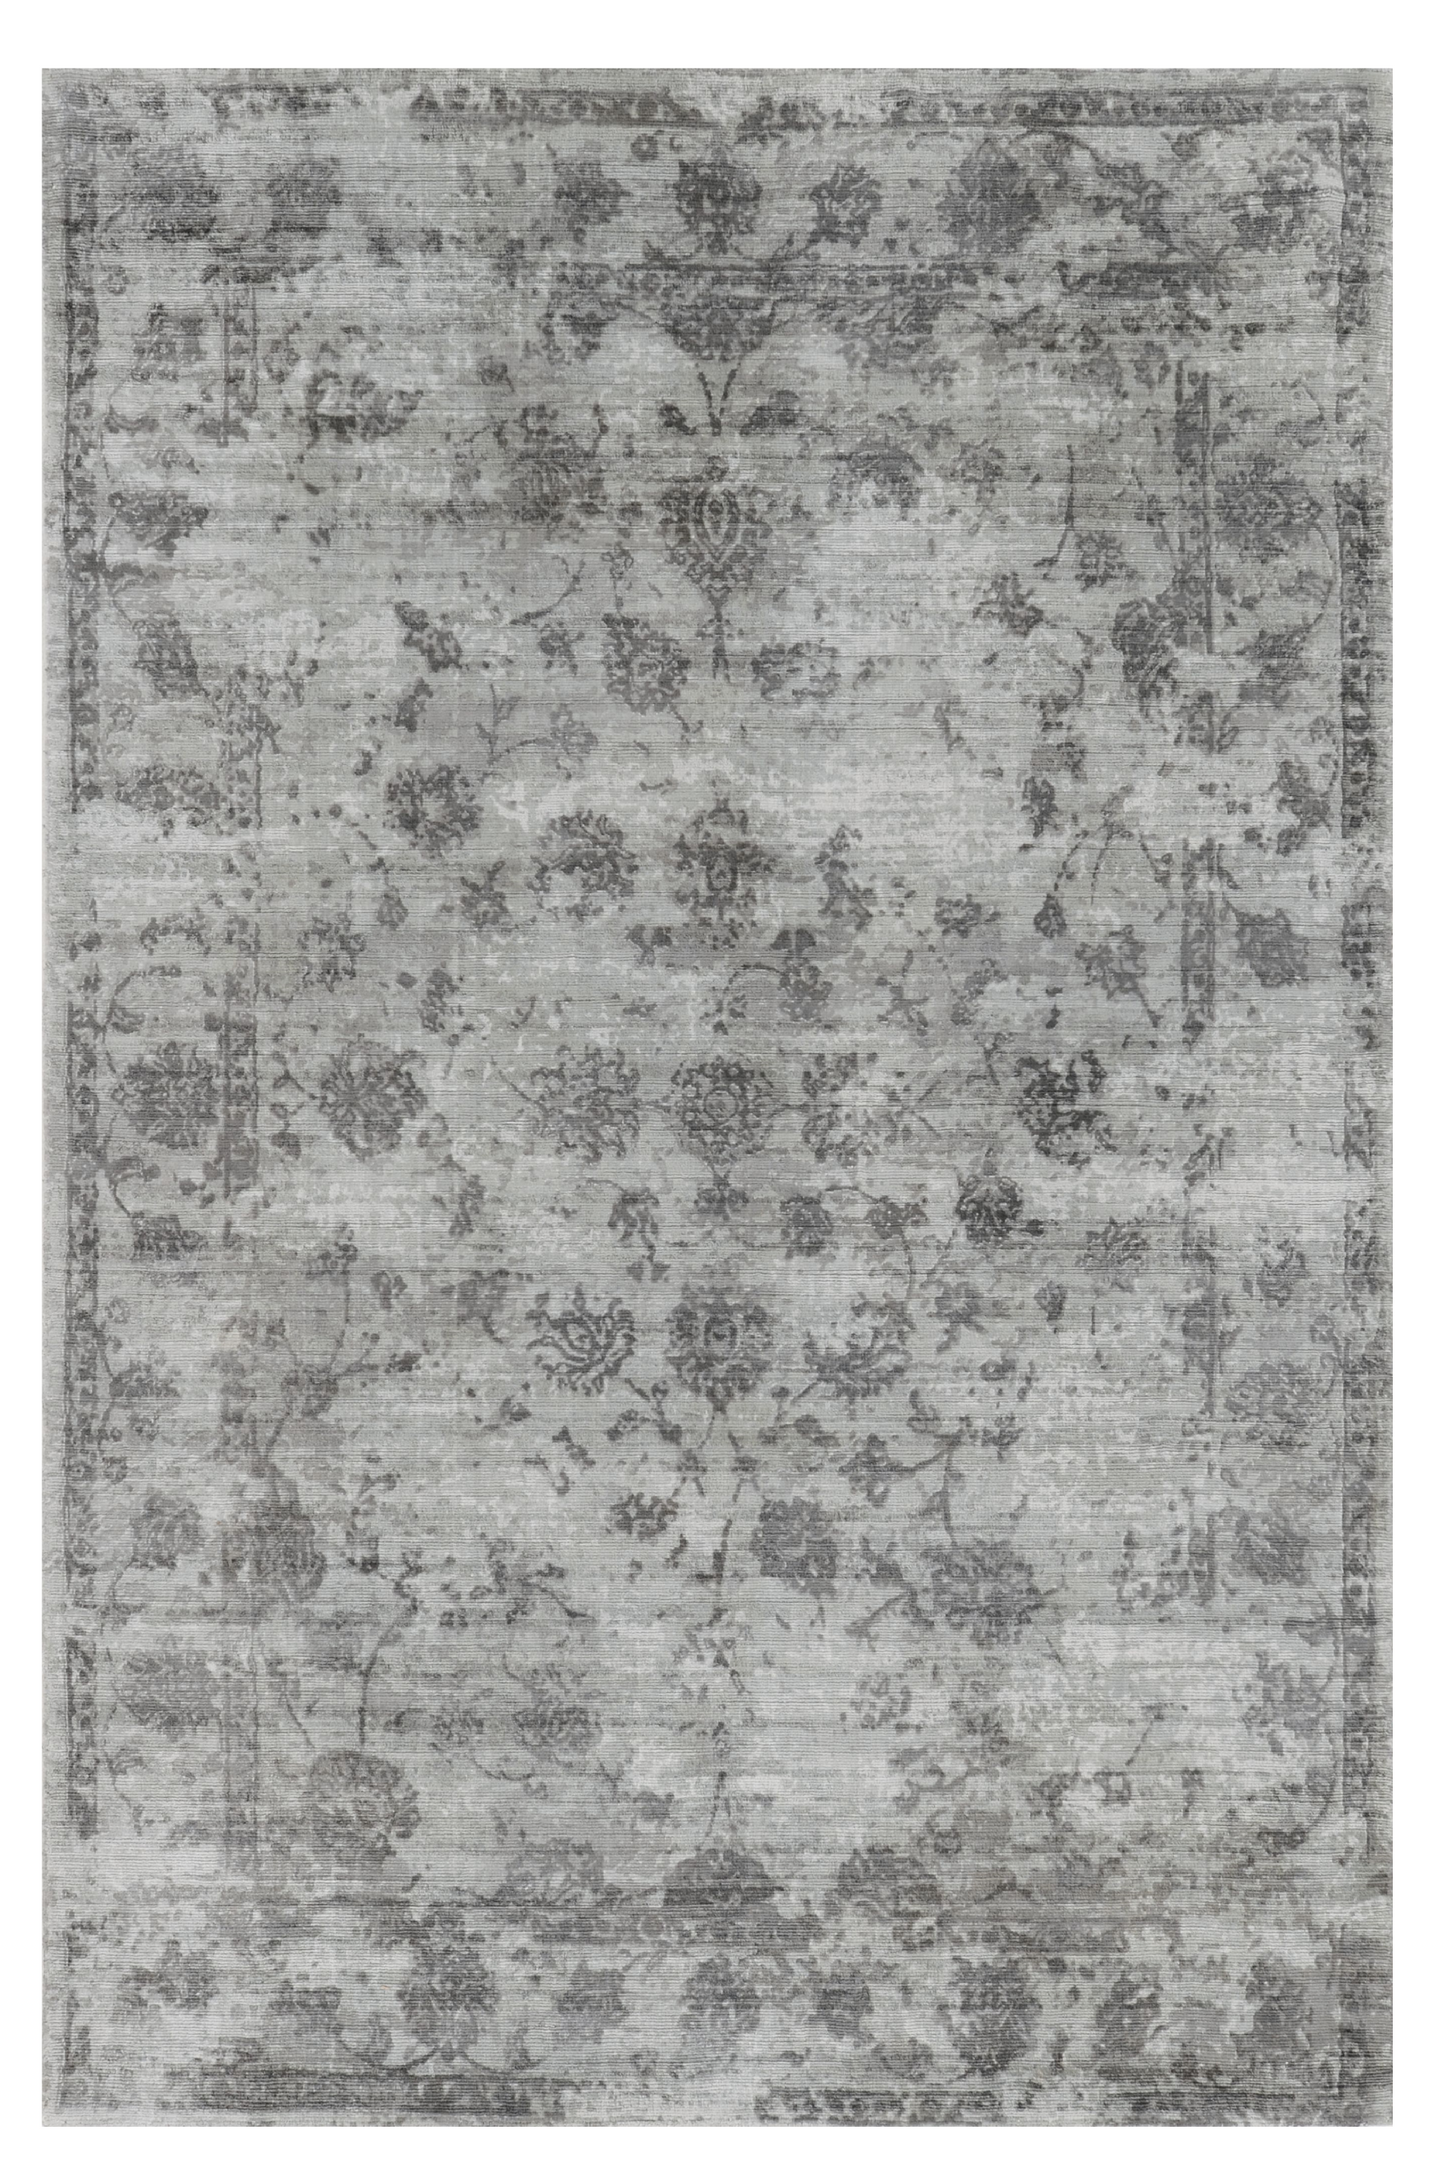 3' X 5' Gray Floral Vines Hand Loomed Distressed Area Rug